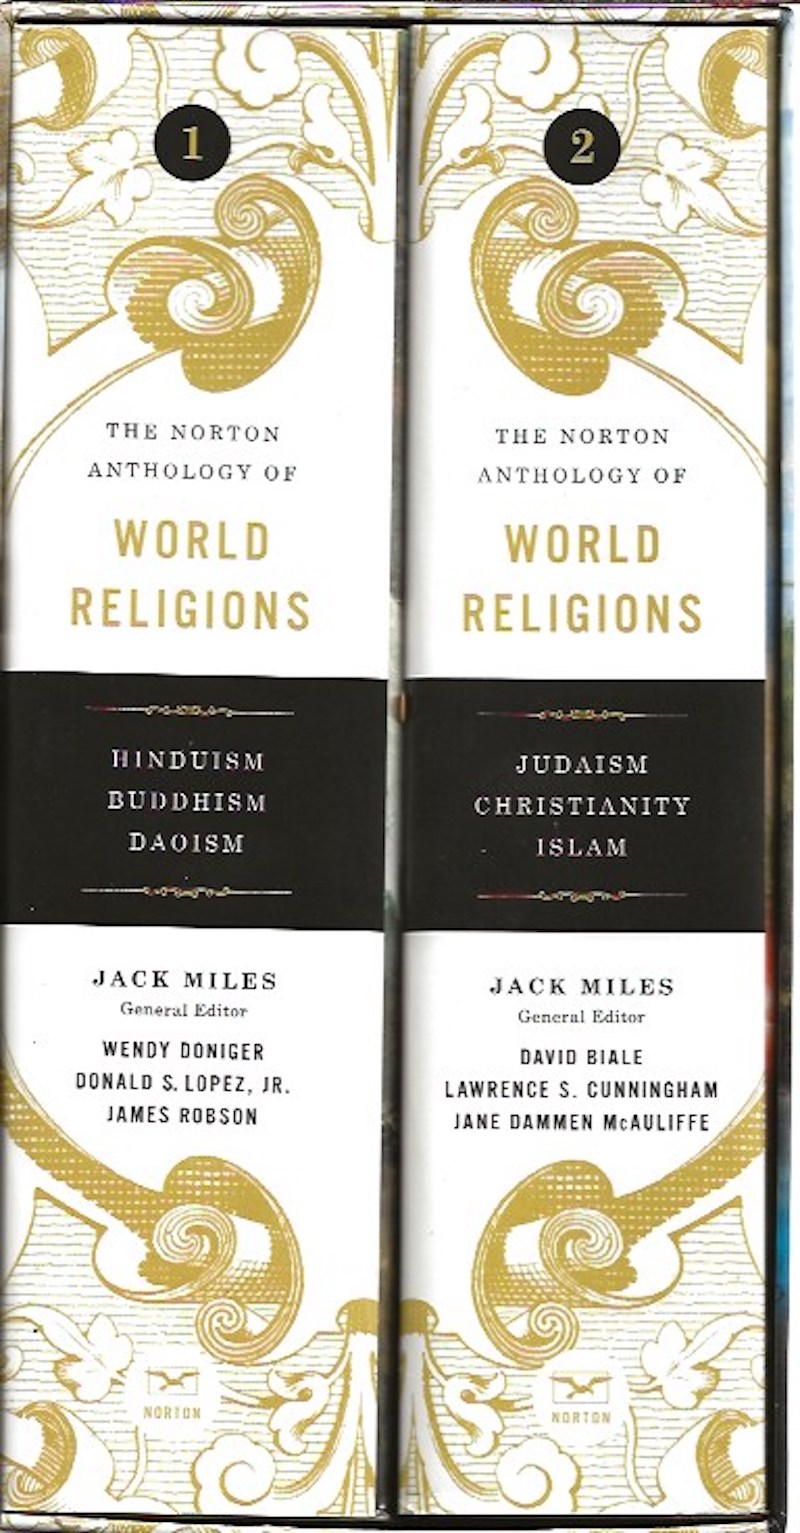 The Norton Anthology of World Religions by Miles, Jack general editor